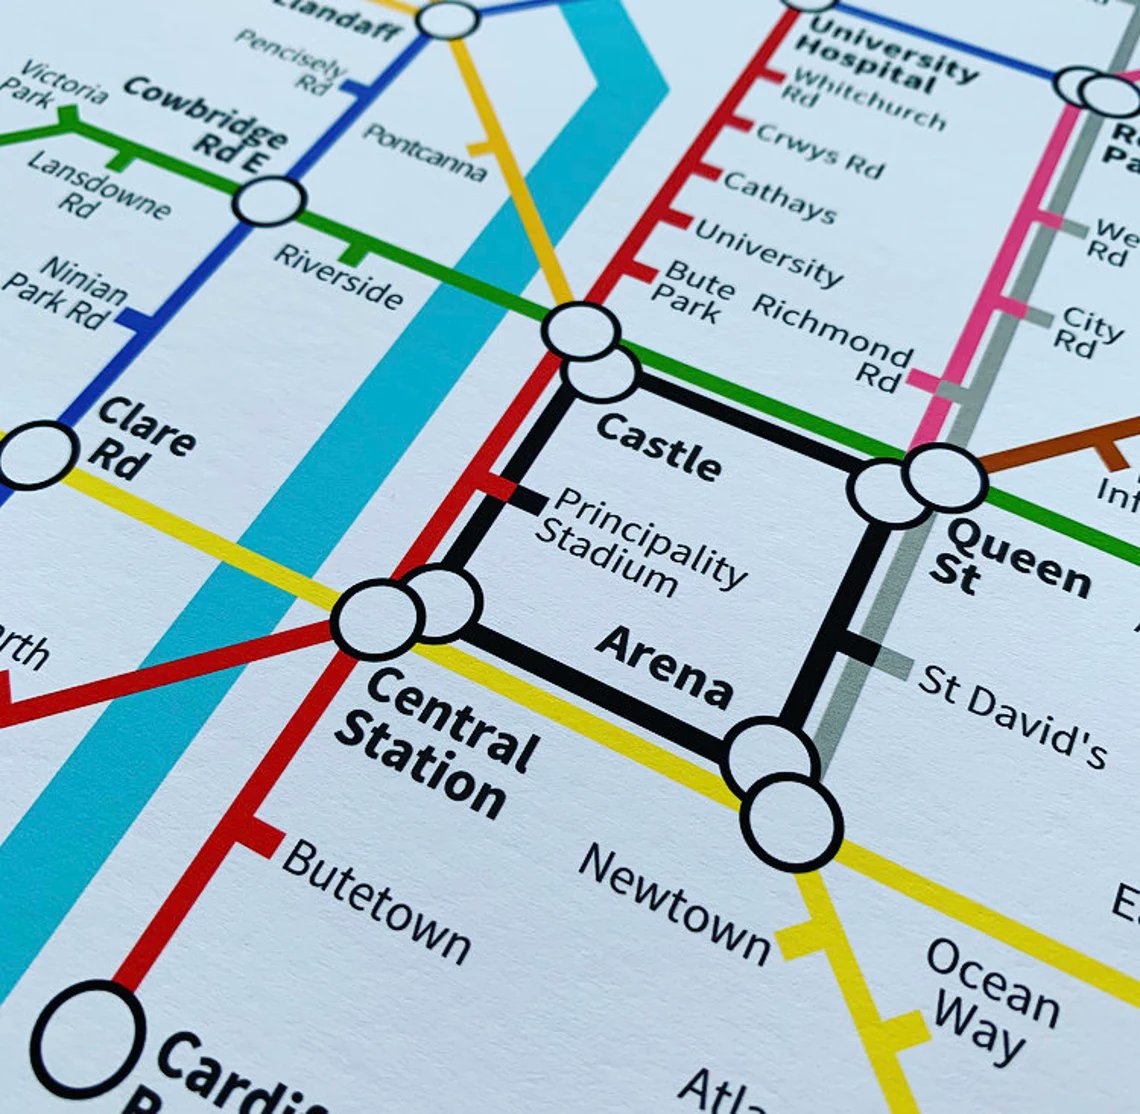 Cardiff Underground Style Map - Add your own station with our customisation option! shorturl.at/nxBIQ 🗺️🚇🔍😍

#cardiff #cardiffcity #cardiffart #cardiffbiz #cardiffhour